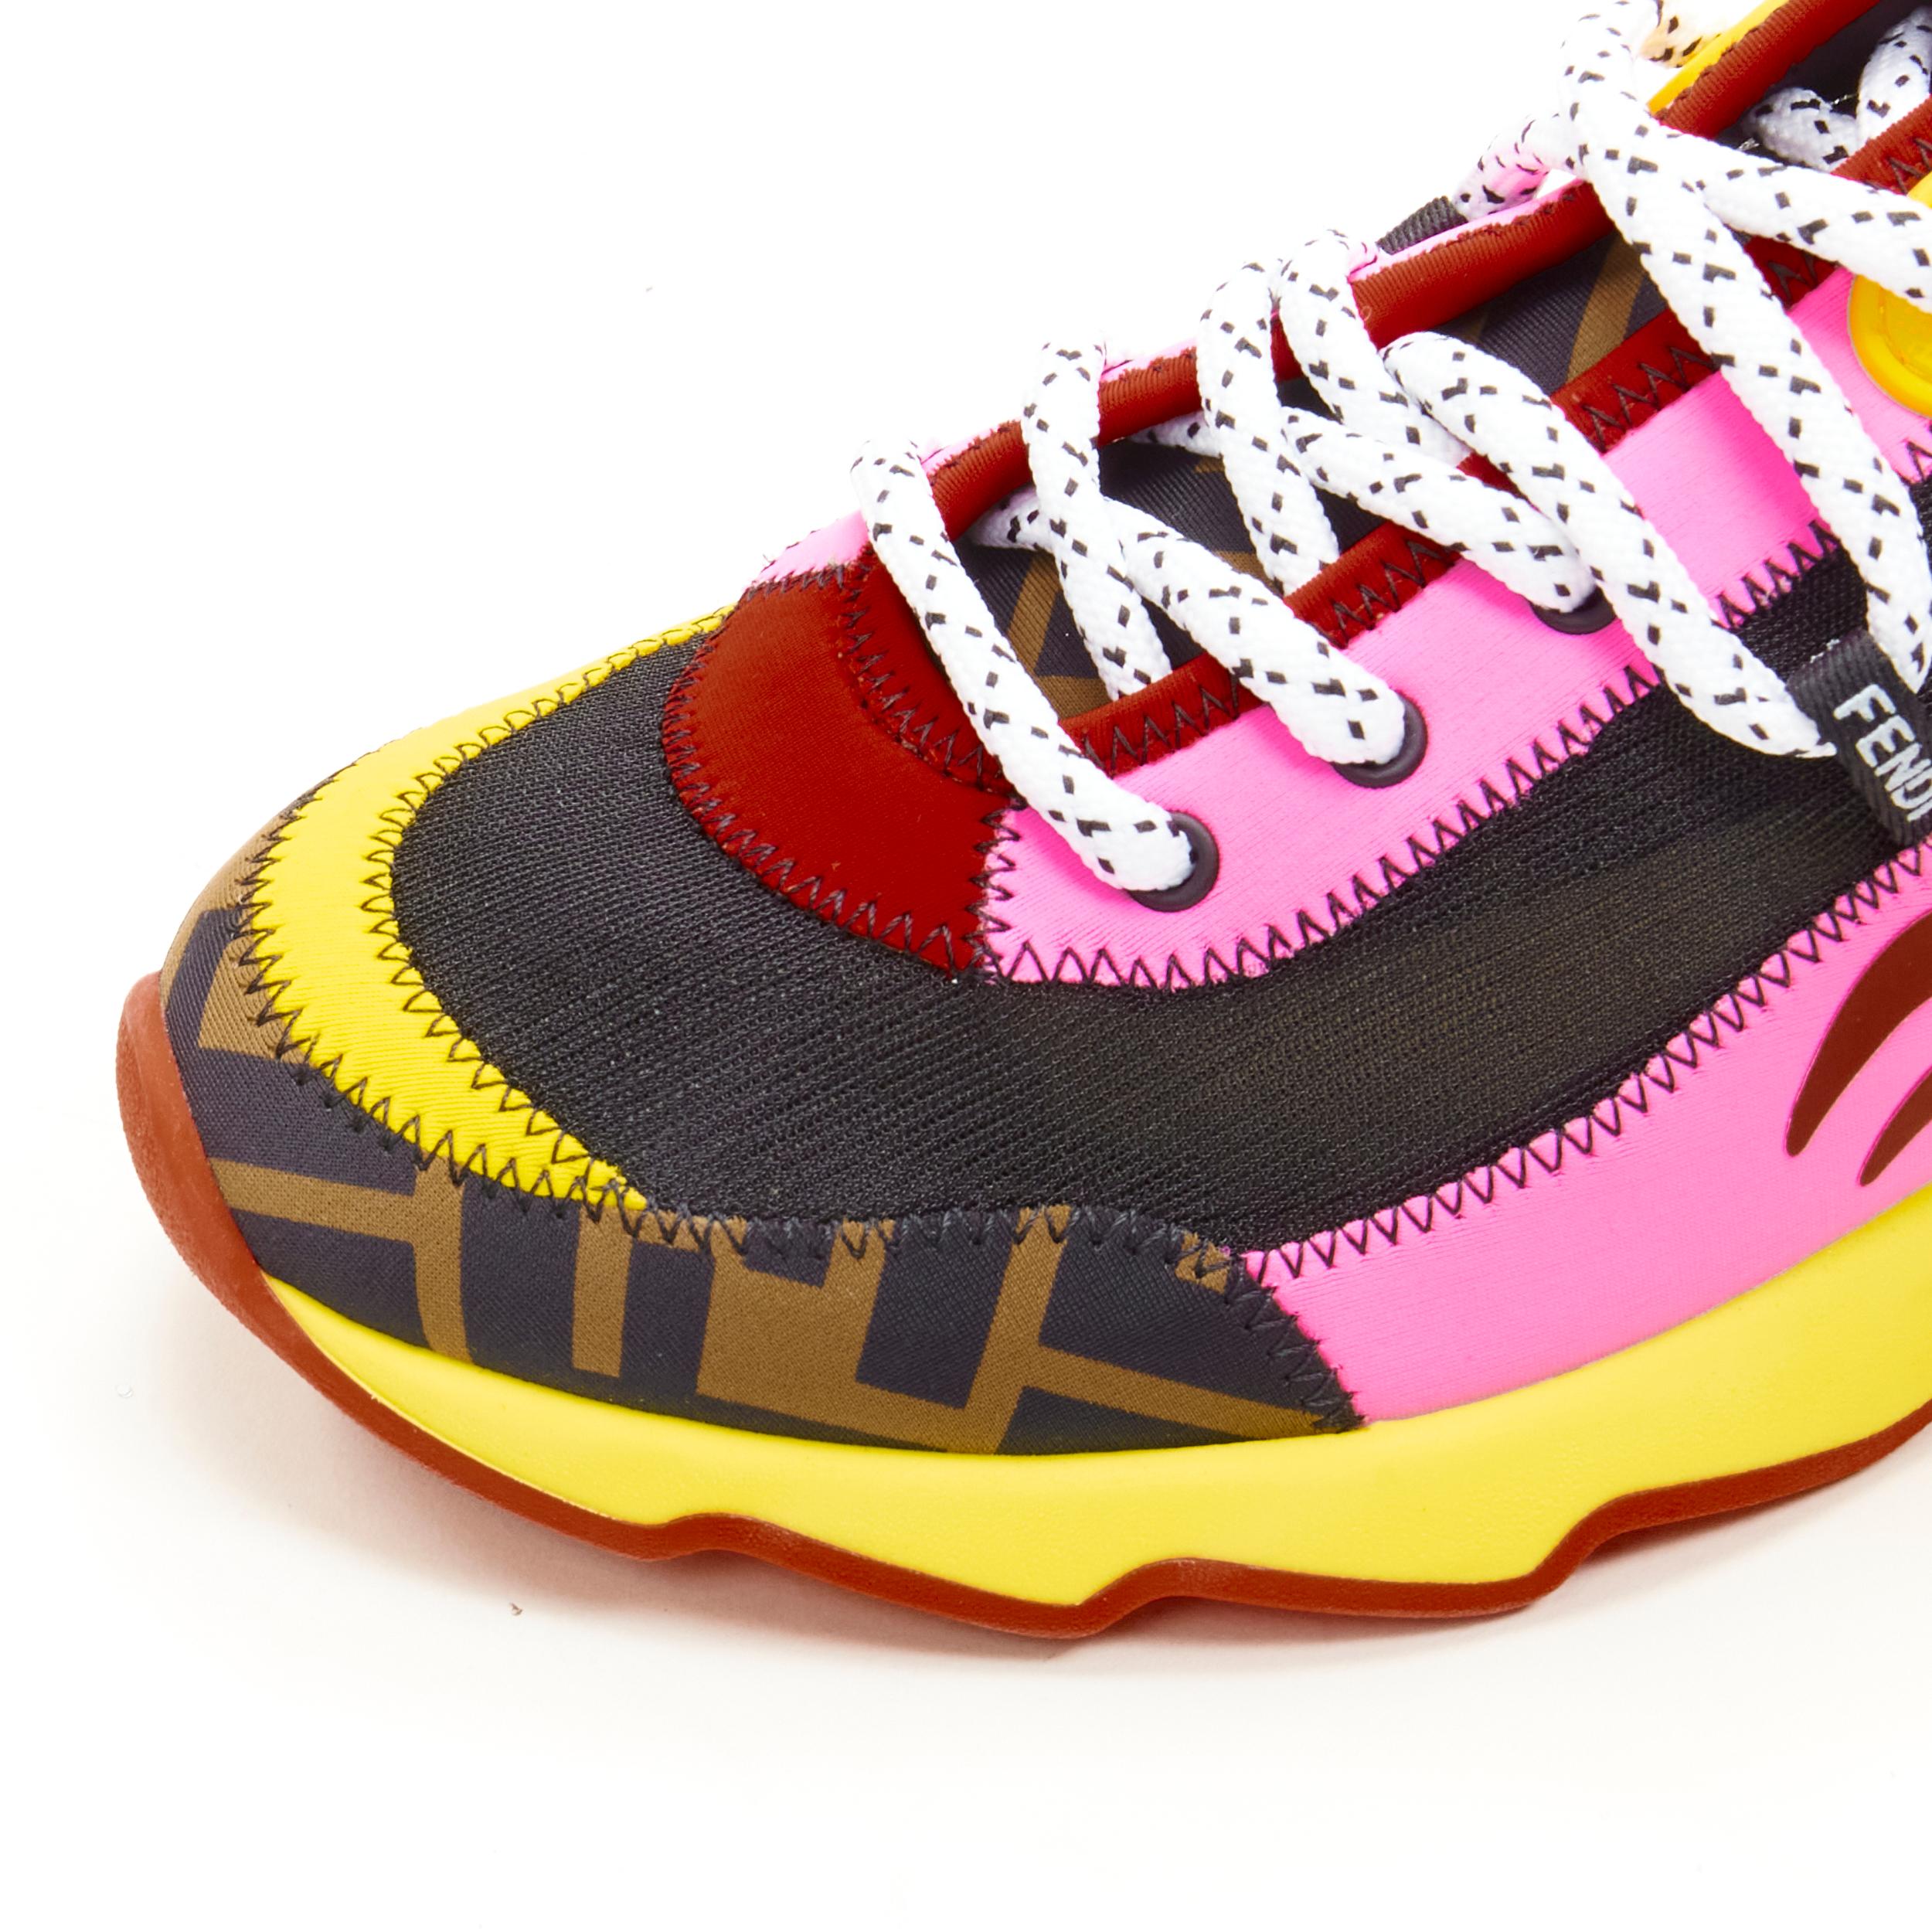 FENDI Freedom FF Zucca pink yellow black technical fabric runner sneaker EU36 
Reference: ANWU/A00360 
Brand: Fendi 
Model: Freedom FF 
Material: Fabric 
Color: Pink 
Pattern: Solid 
Closure: Lace 
Extra Detail: Zucca FF trim at toe bow. Logo loop